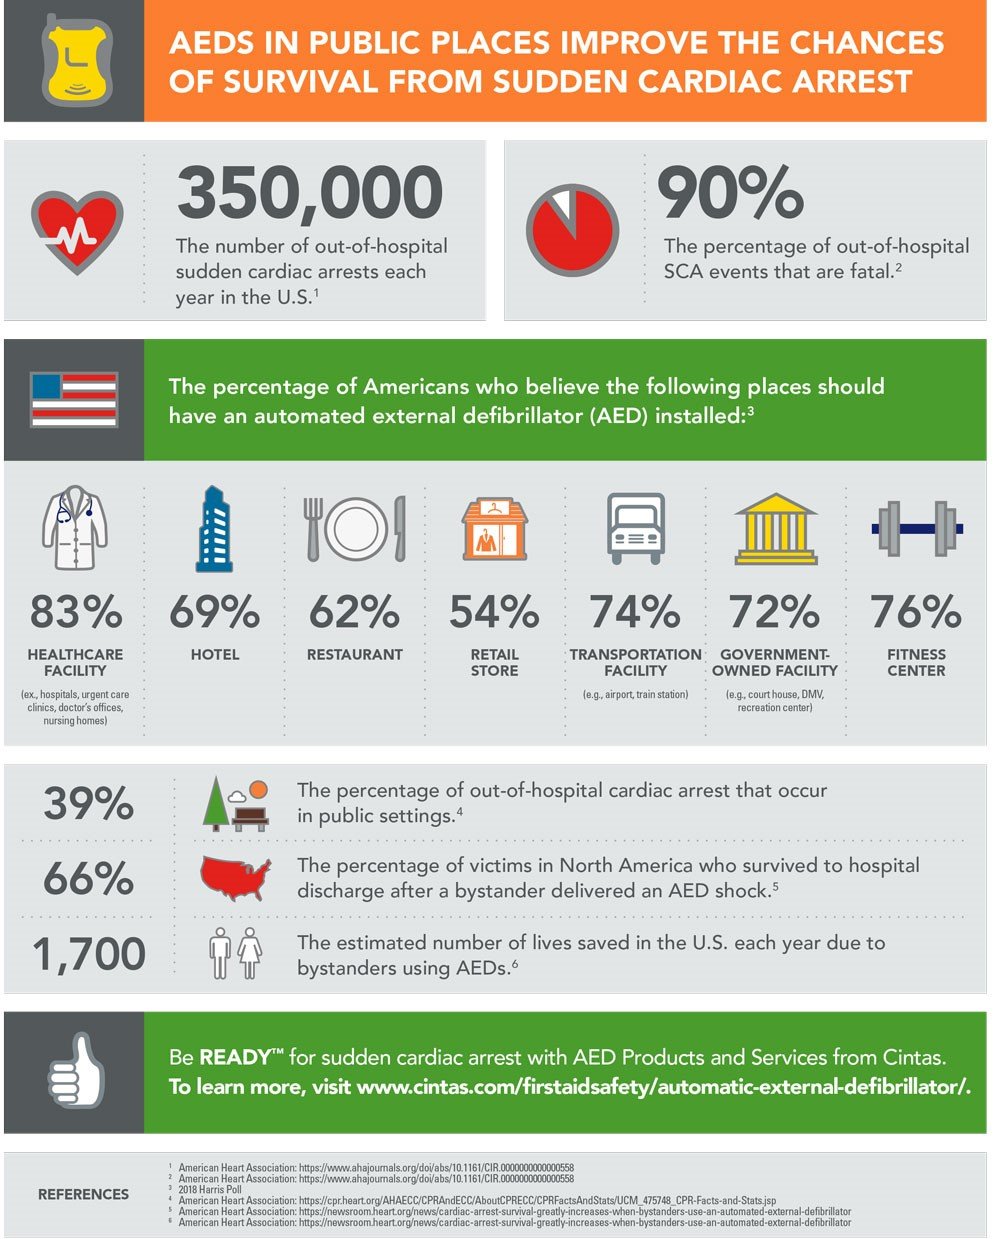 Infographic about AED usage and availability in public places